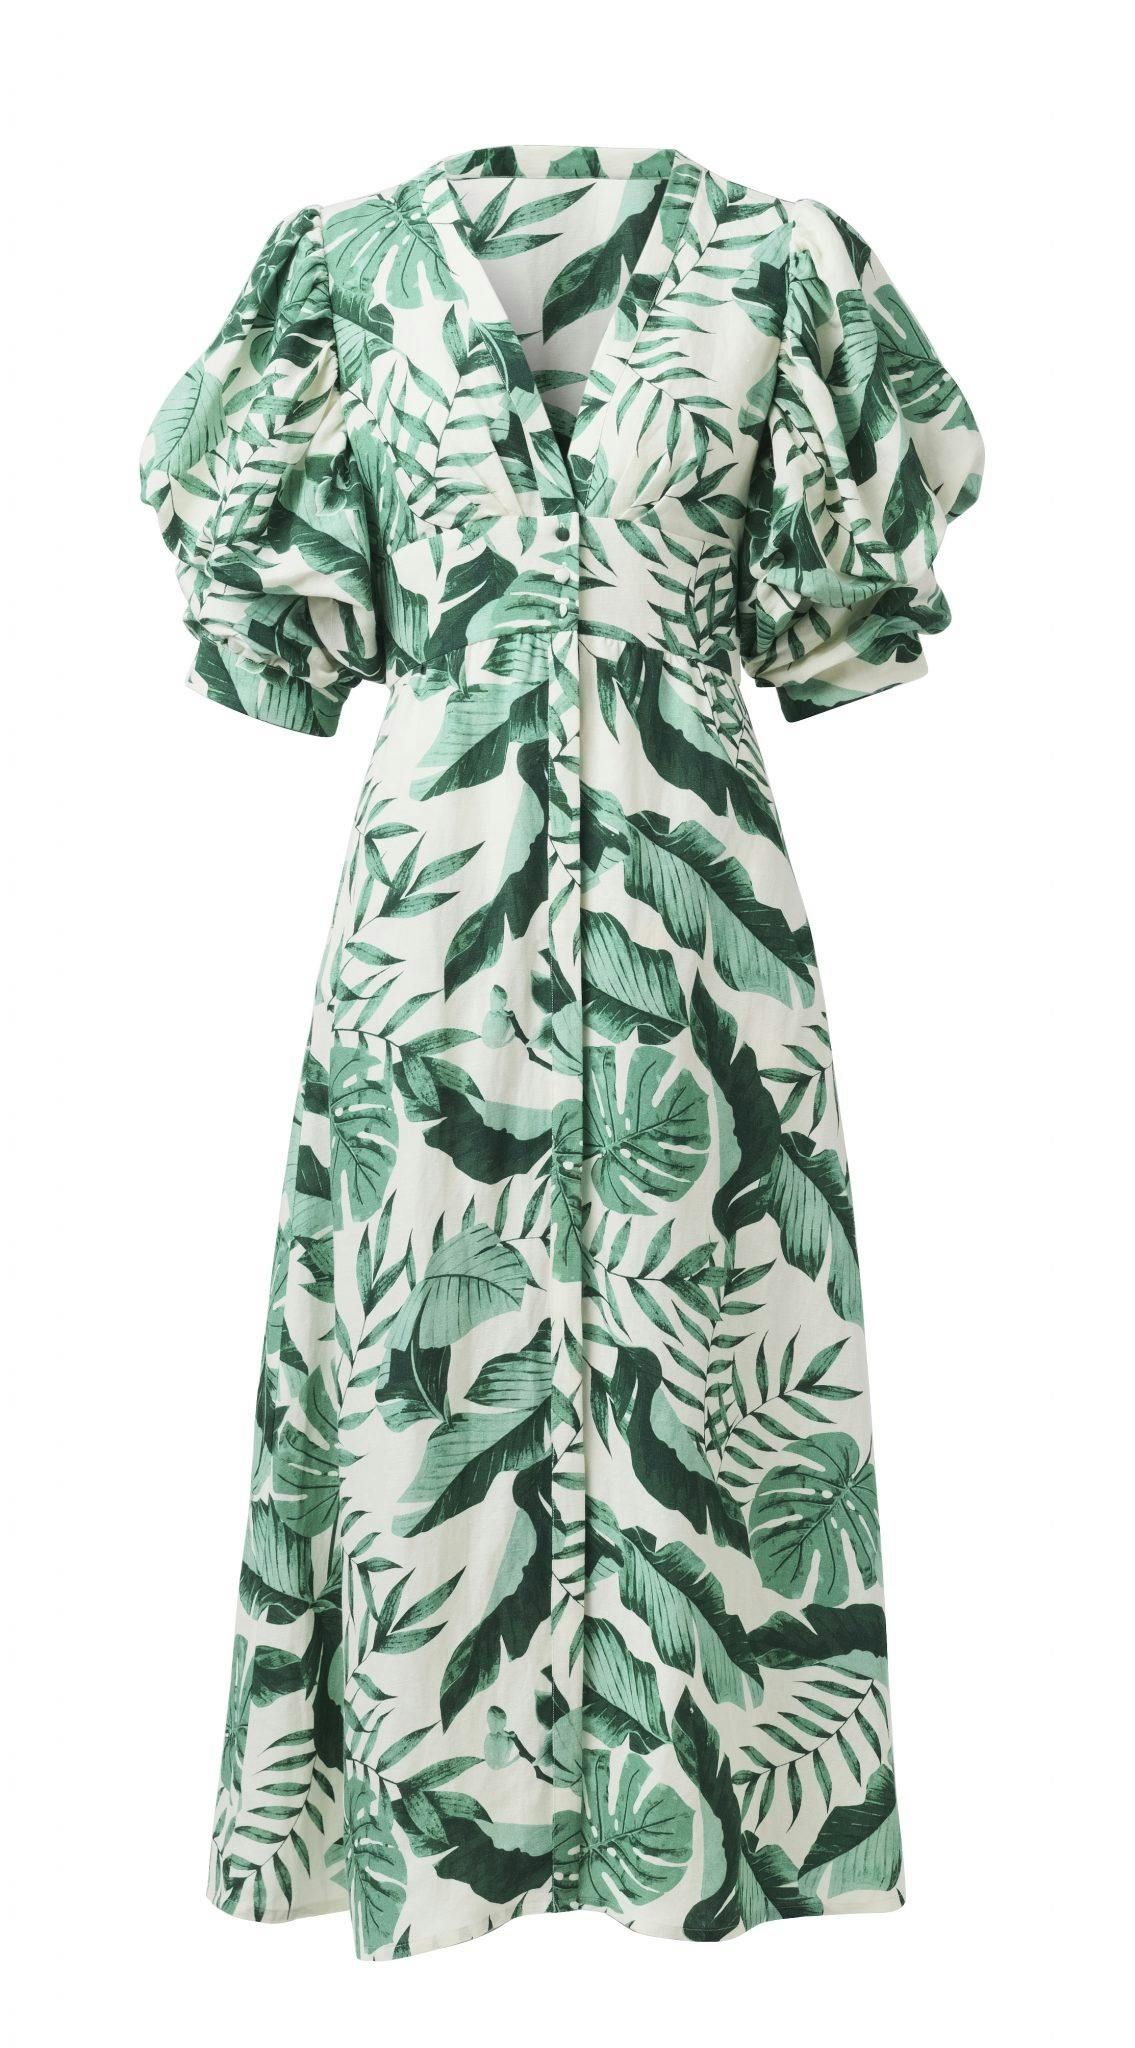 Best tropical print dresses, tops and skirts to shop now